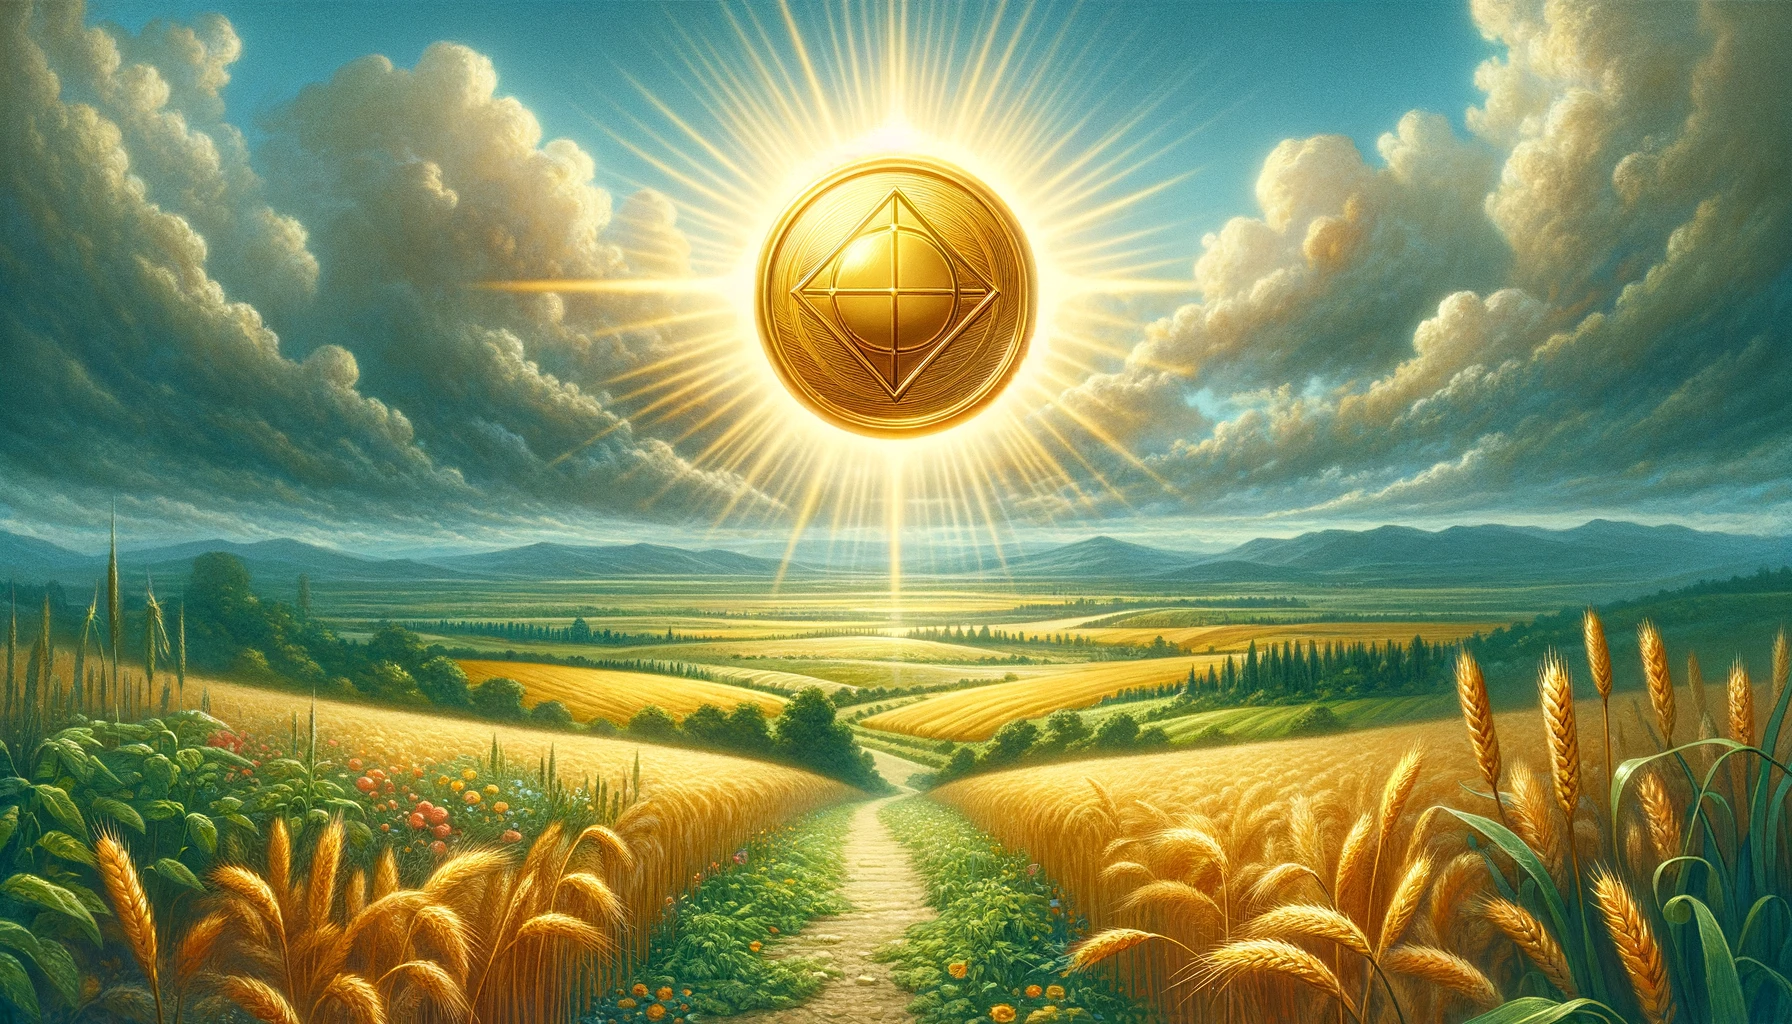 An illustration featuring a radiant golden pentacle surrounded by a halo of light, set against a backdrop of fertile landscape with golden wheat fields, lush greenery, and a clear blue sky. Symbolizing prosperity and hope, the scene embodies the desire for stability and material success, illustrating the yearning for new beginnings in financial or physical realms. The path leading to the pentacle represents the journey towards these aspirations and the commitment required to achieve them.